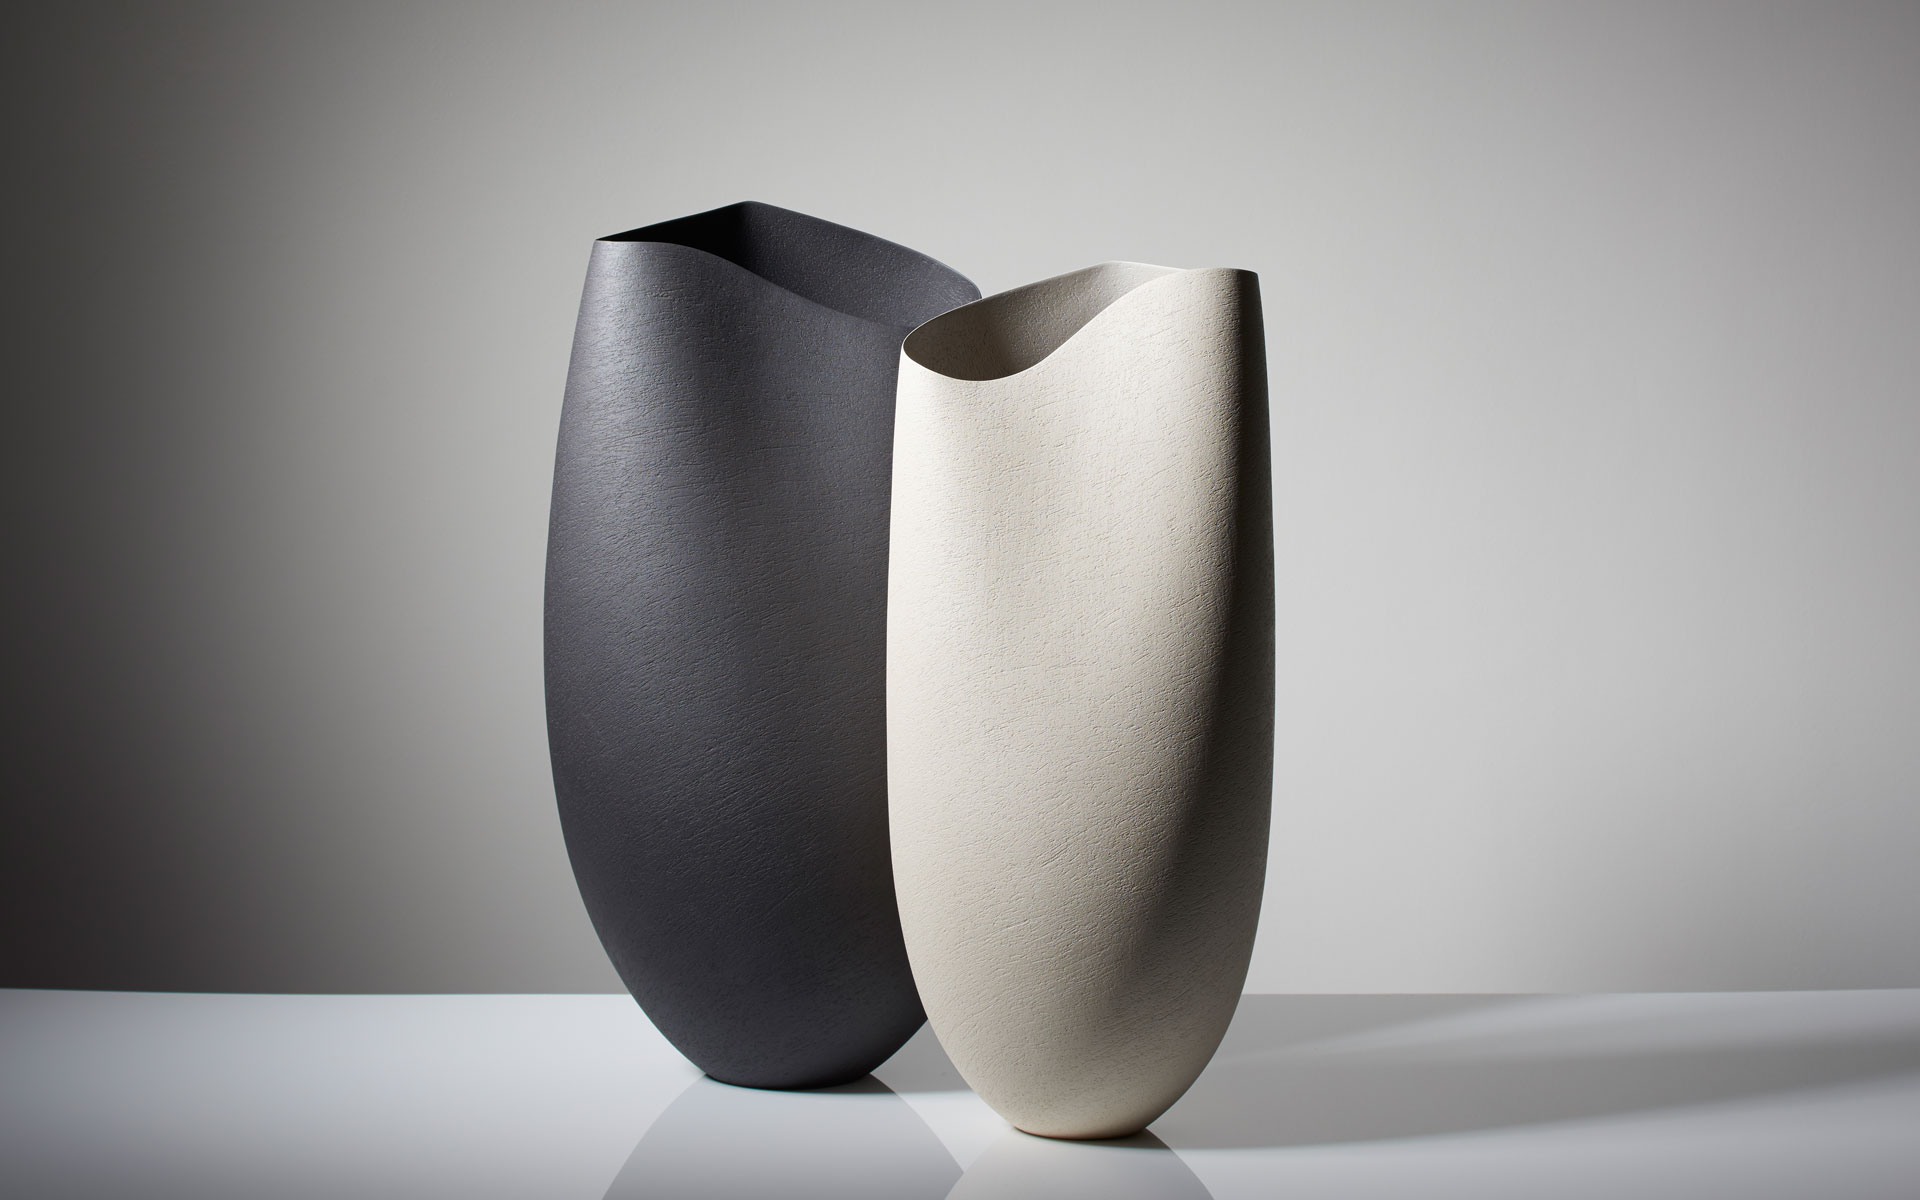 Black and grey vessels